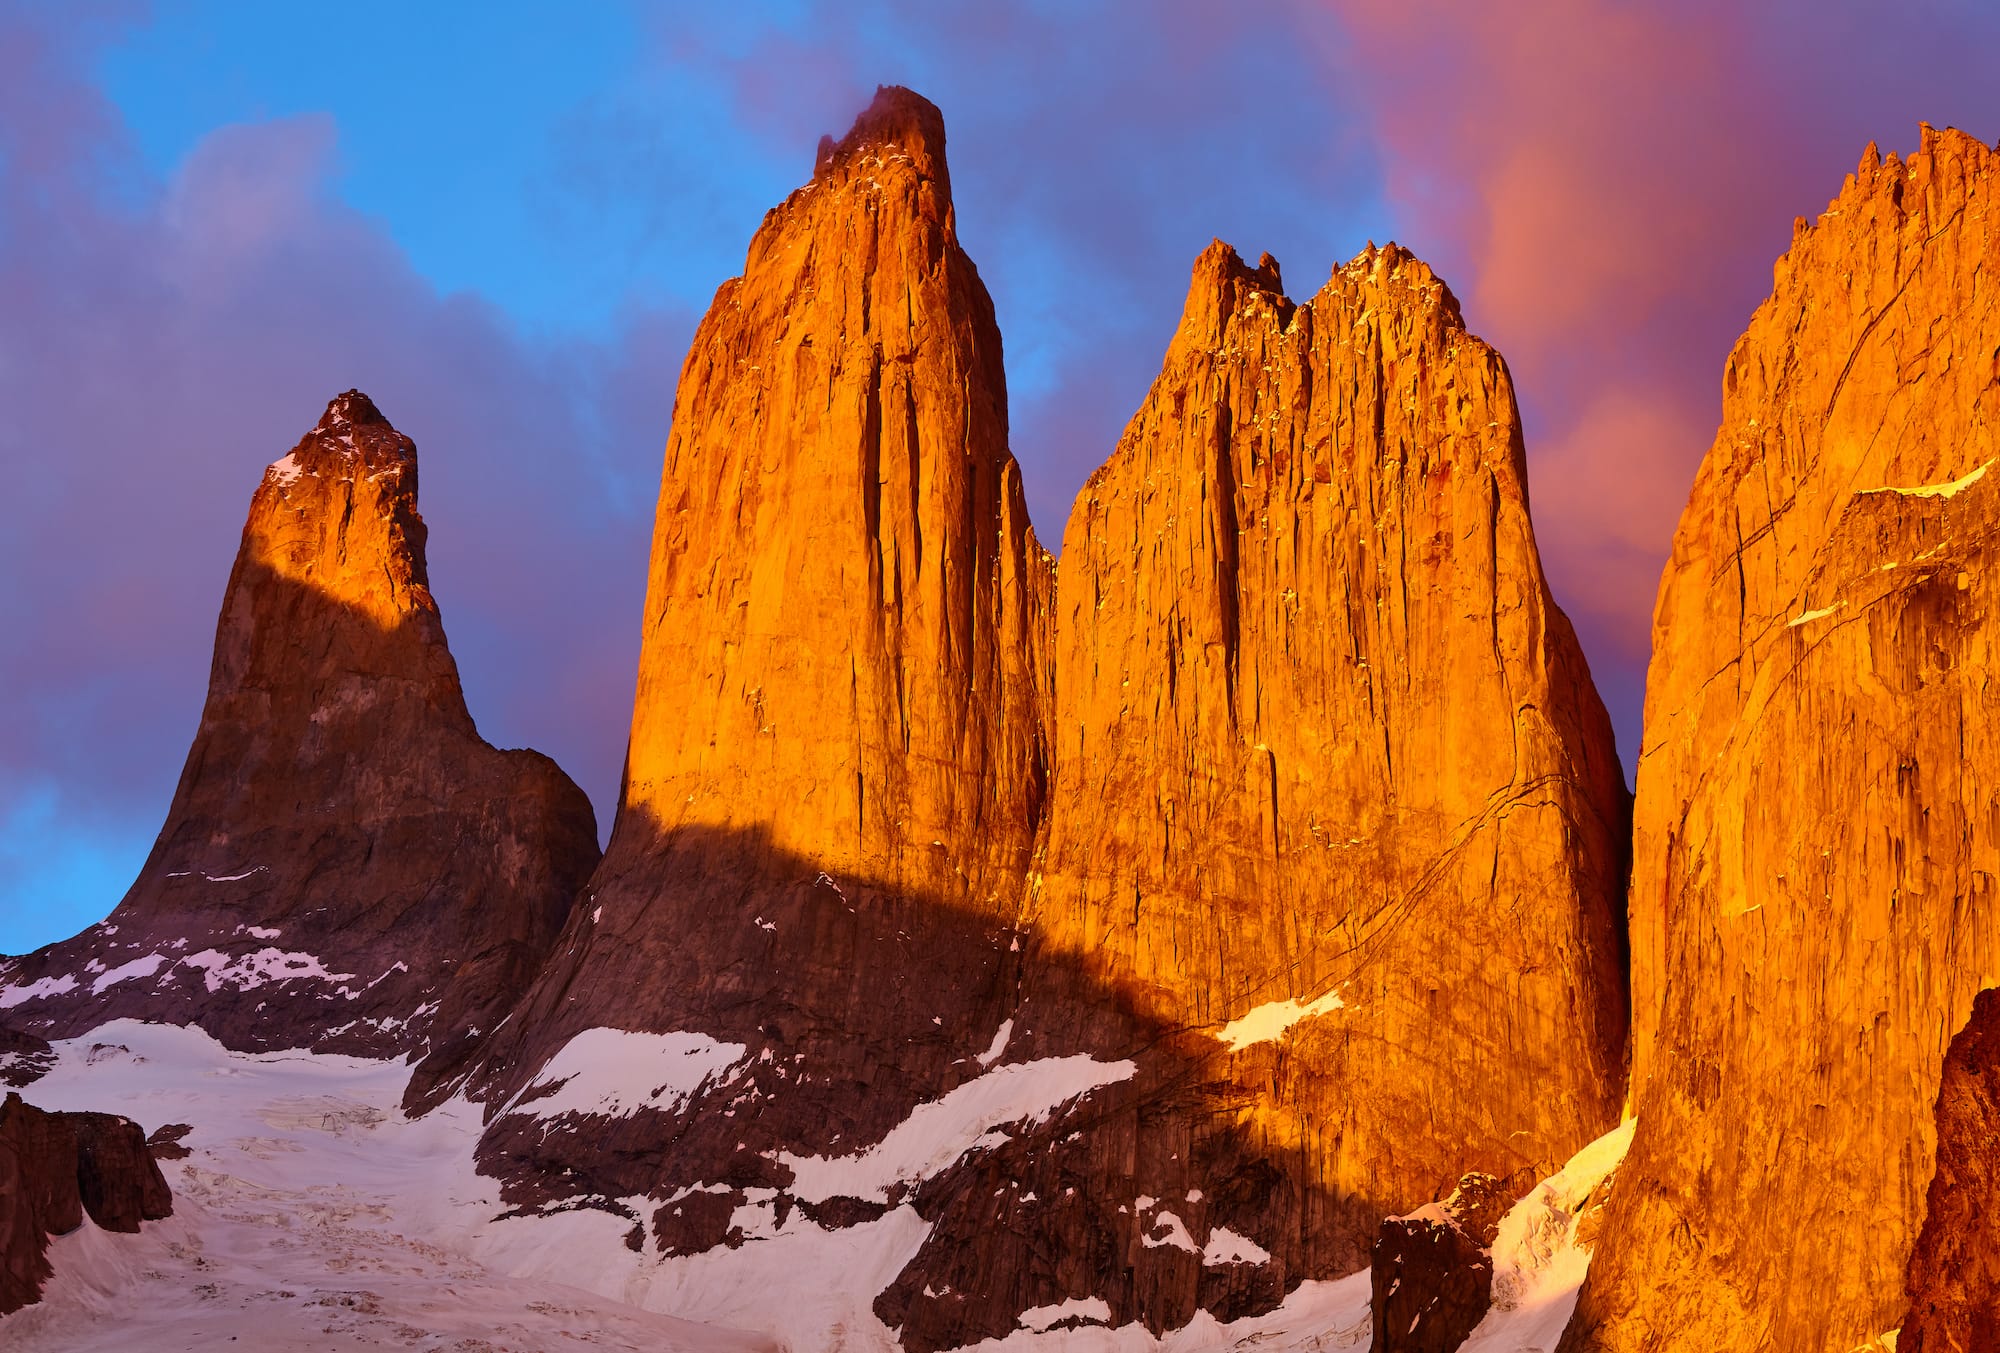 Getting from El Calafate to Torres del Paine Secrets of Patagonia